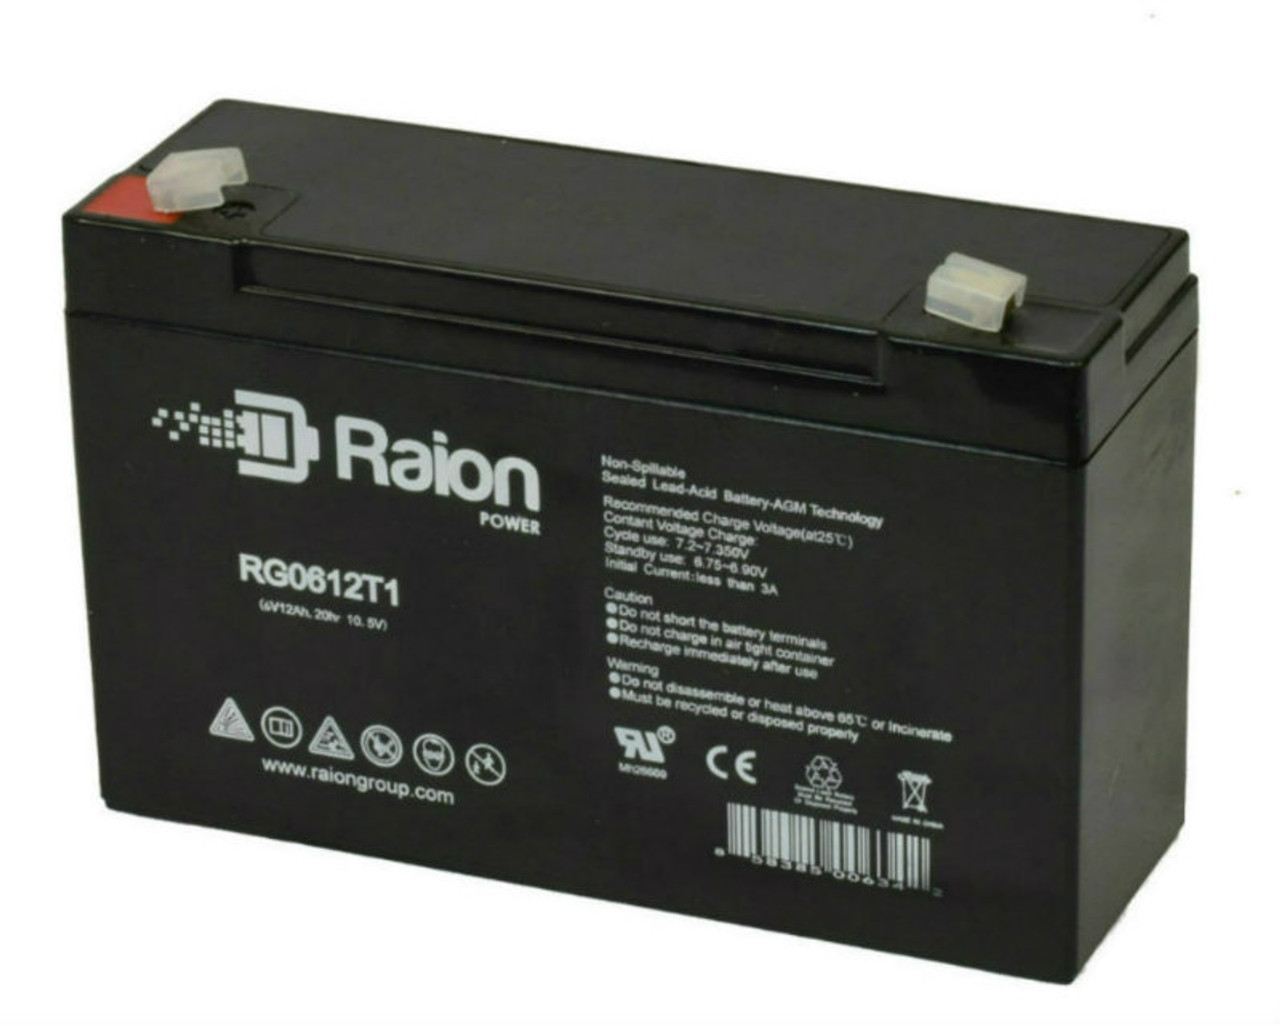 Raion Power RG06120T1 Replacement Battery for Panasonic LC-R0612P